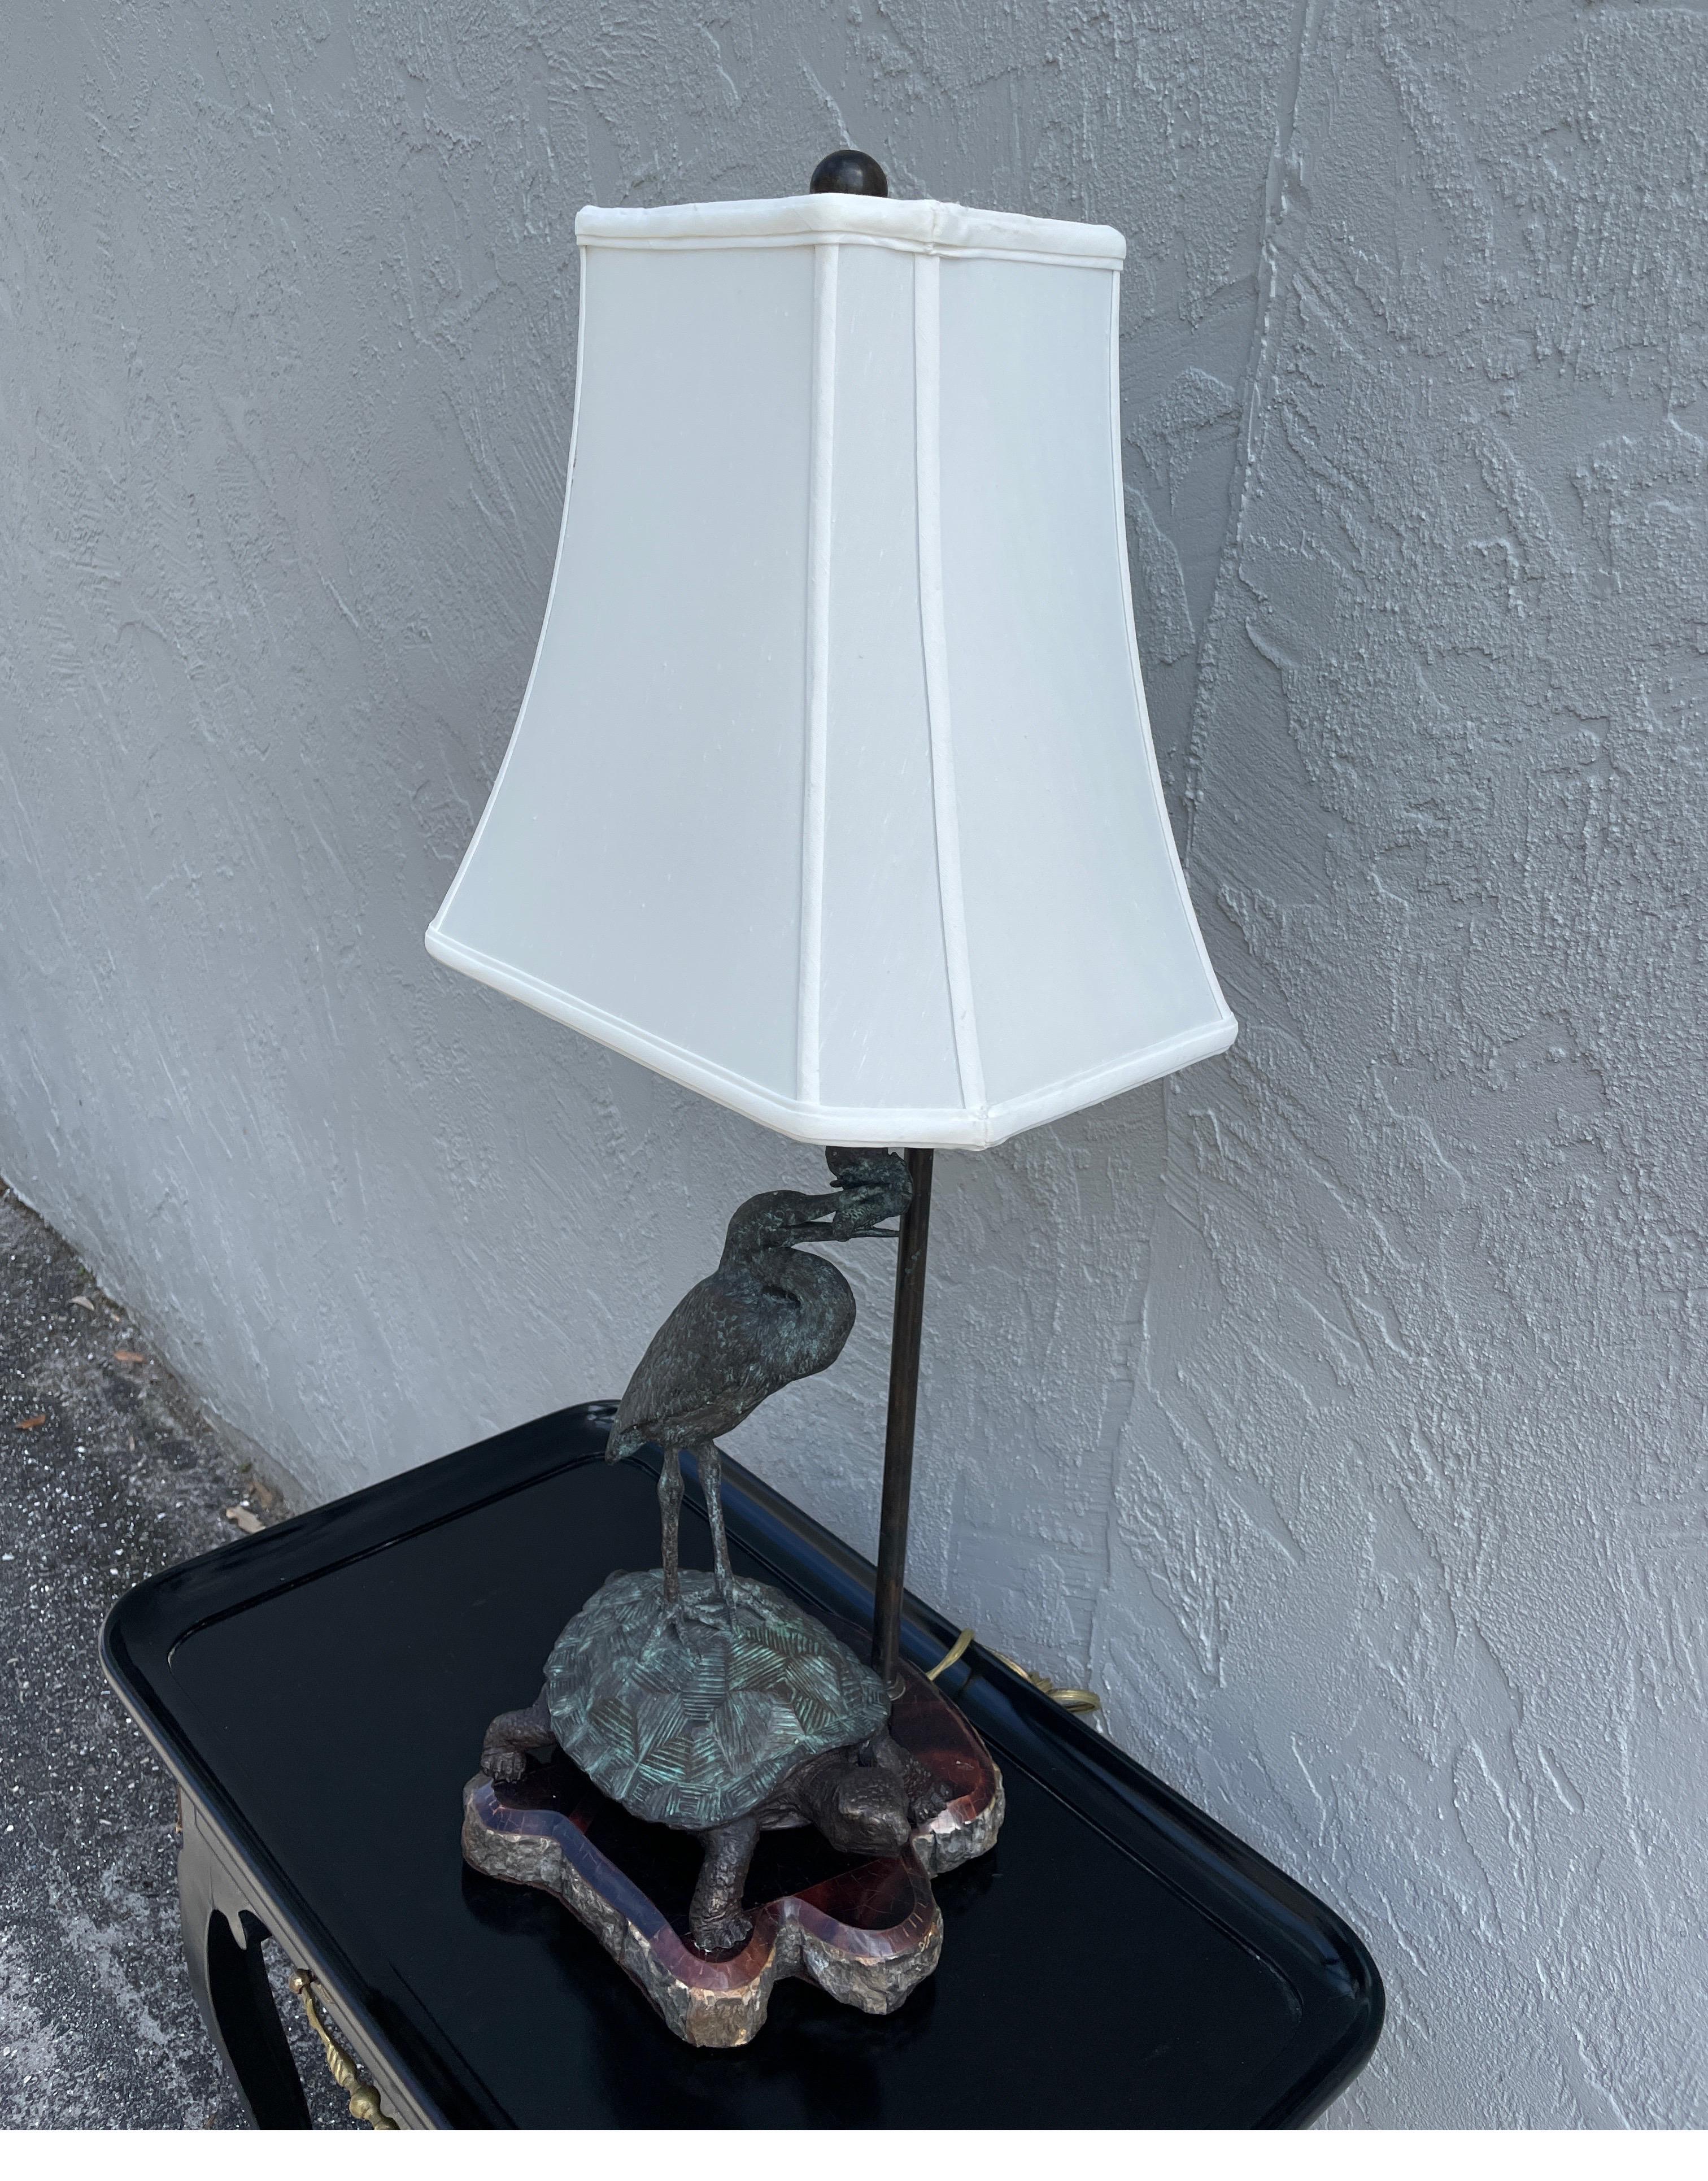 Bronze table lamp depicting a bird standing on a turtle. Base is a free form shape covered in pen shell.